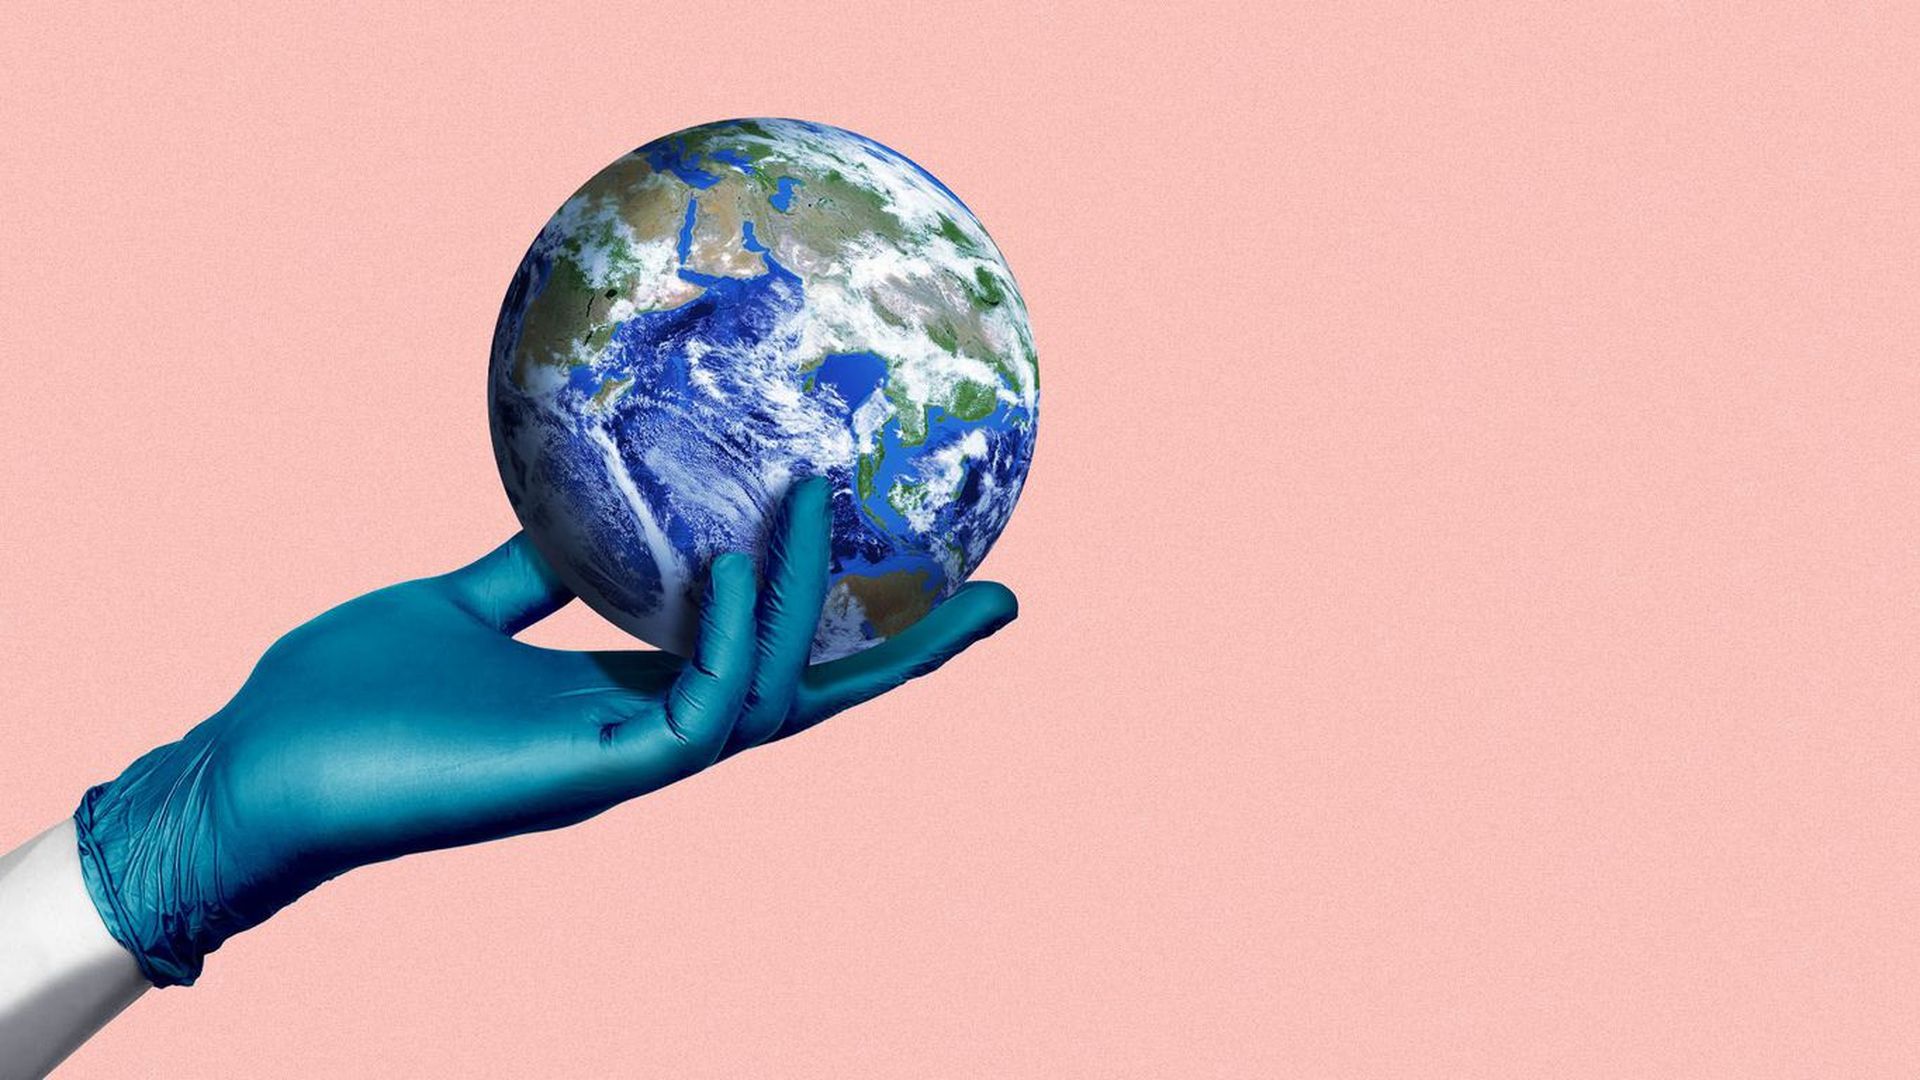 An illustration of a gloved hand holding a globe